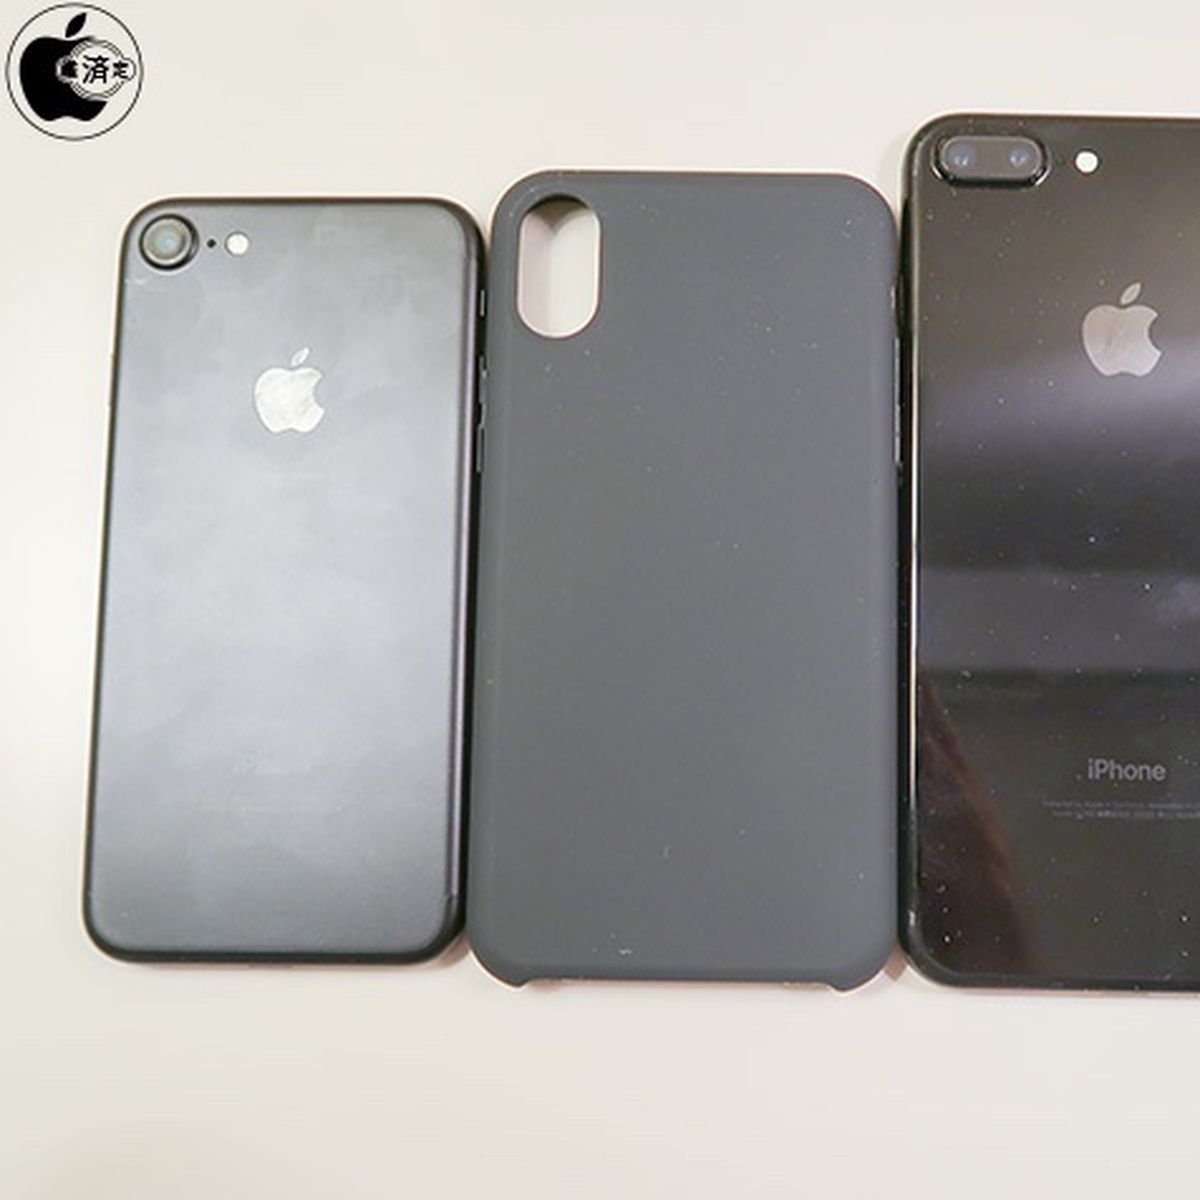 Omgeving Bespreken Ouderling iPhone 8 Case Compared to iPhone 7 Offers Clear Picture of Size Difference  - MacRumors